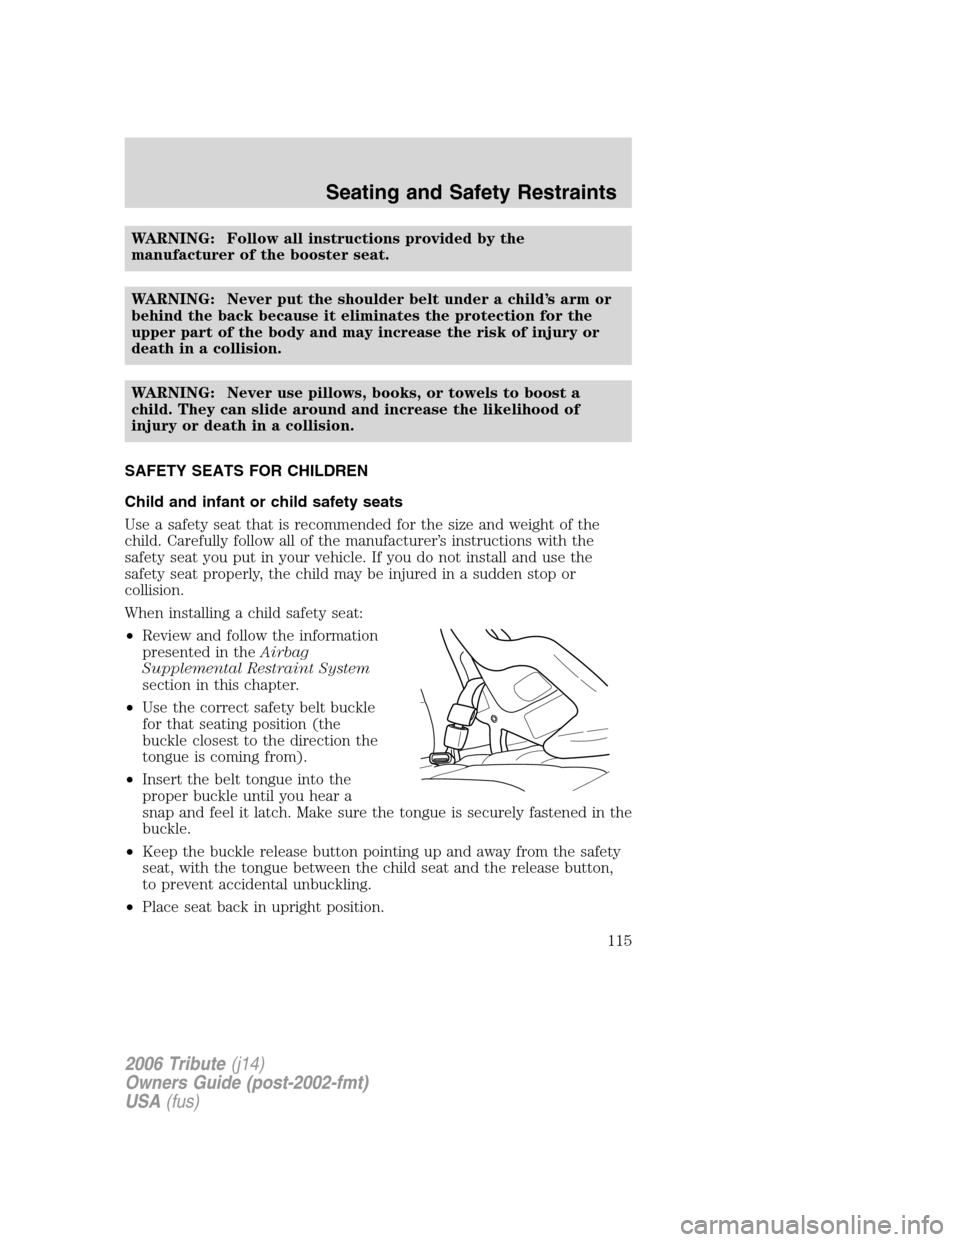 MAZDA MODEL TRIBUTE 2006  Owners Manual (in English) WARNING: Follow all instructions provided by the
manufacturer of the booster seat.
WARNING: Never put the shoulder belt under a child’s arm or
behind the back because it eliminates the protection fo